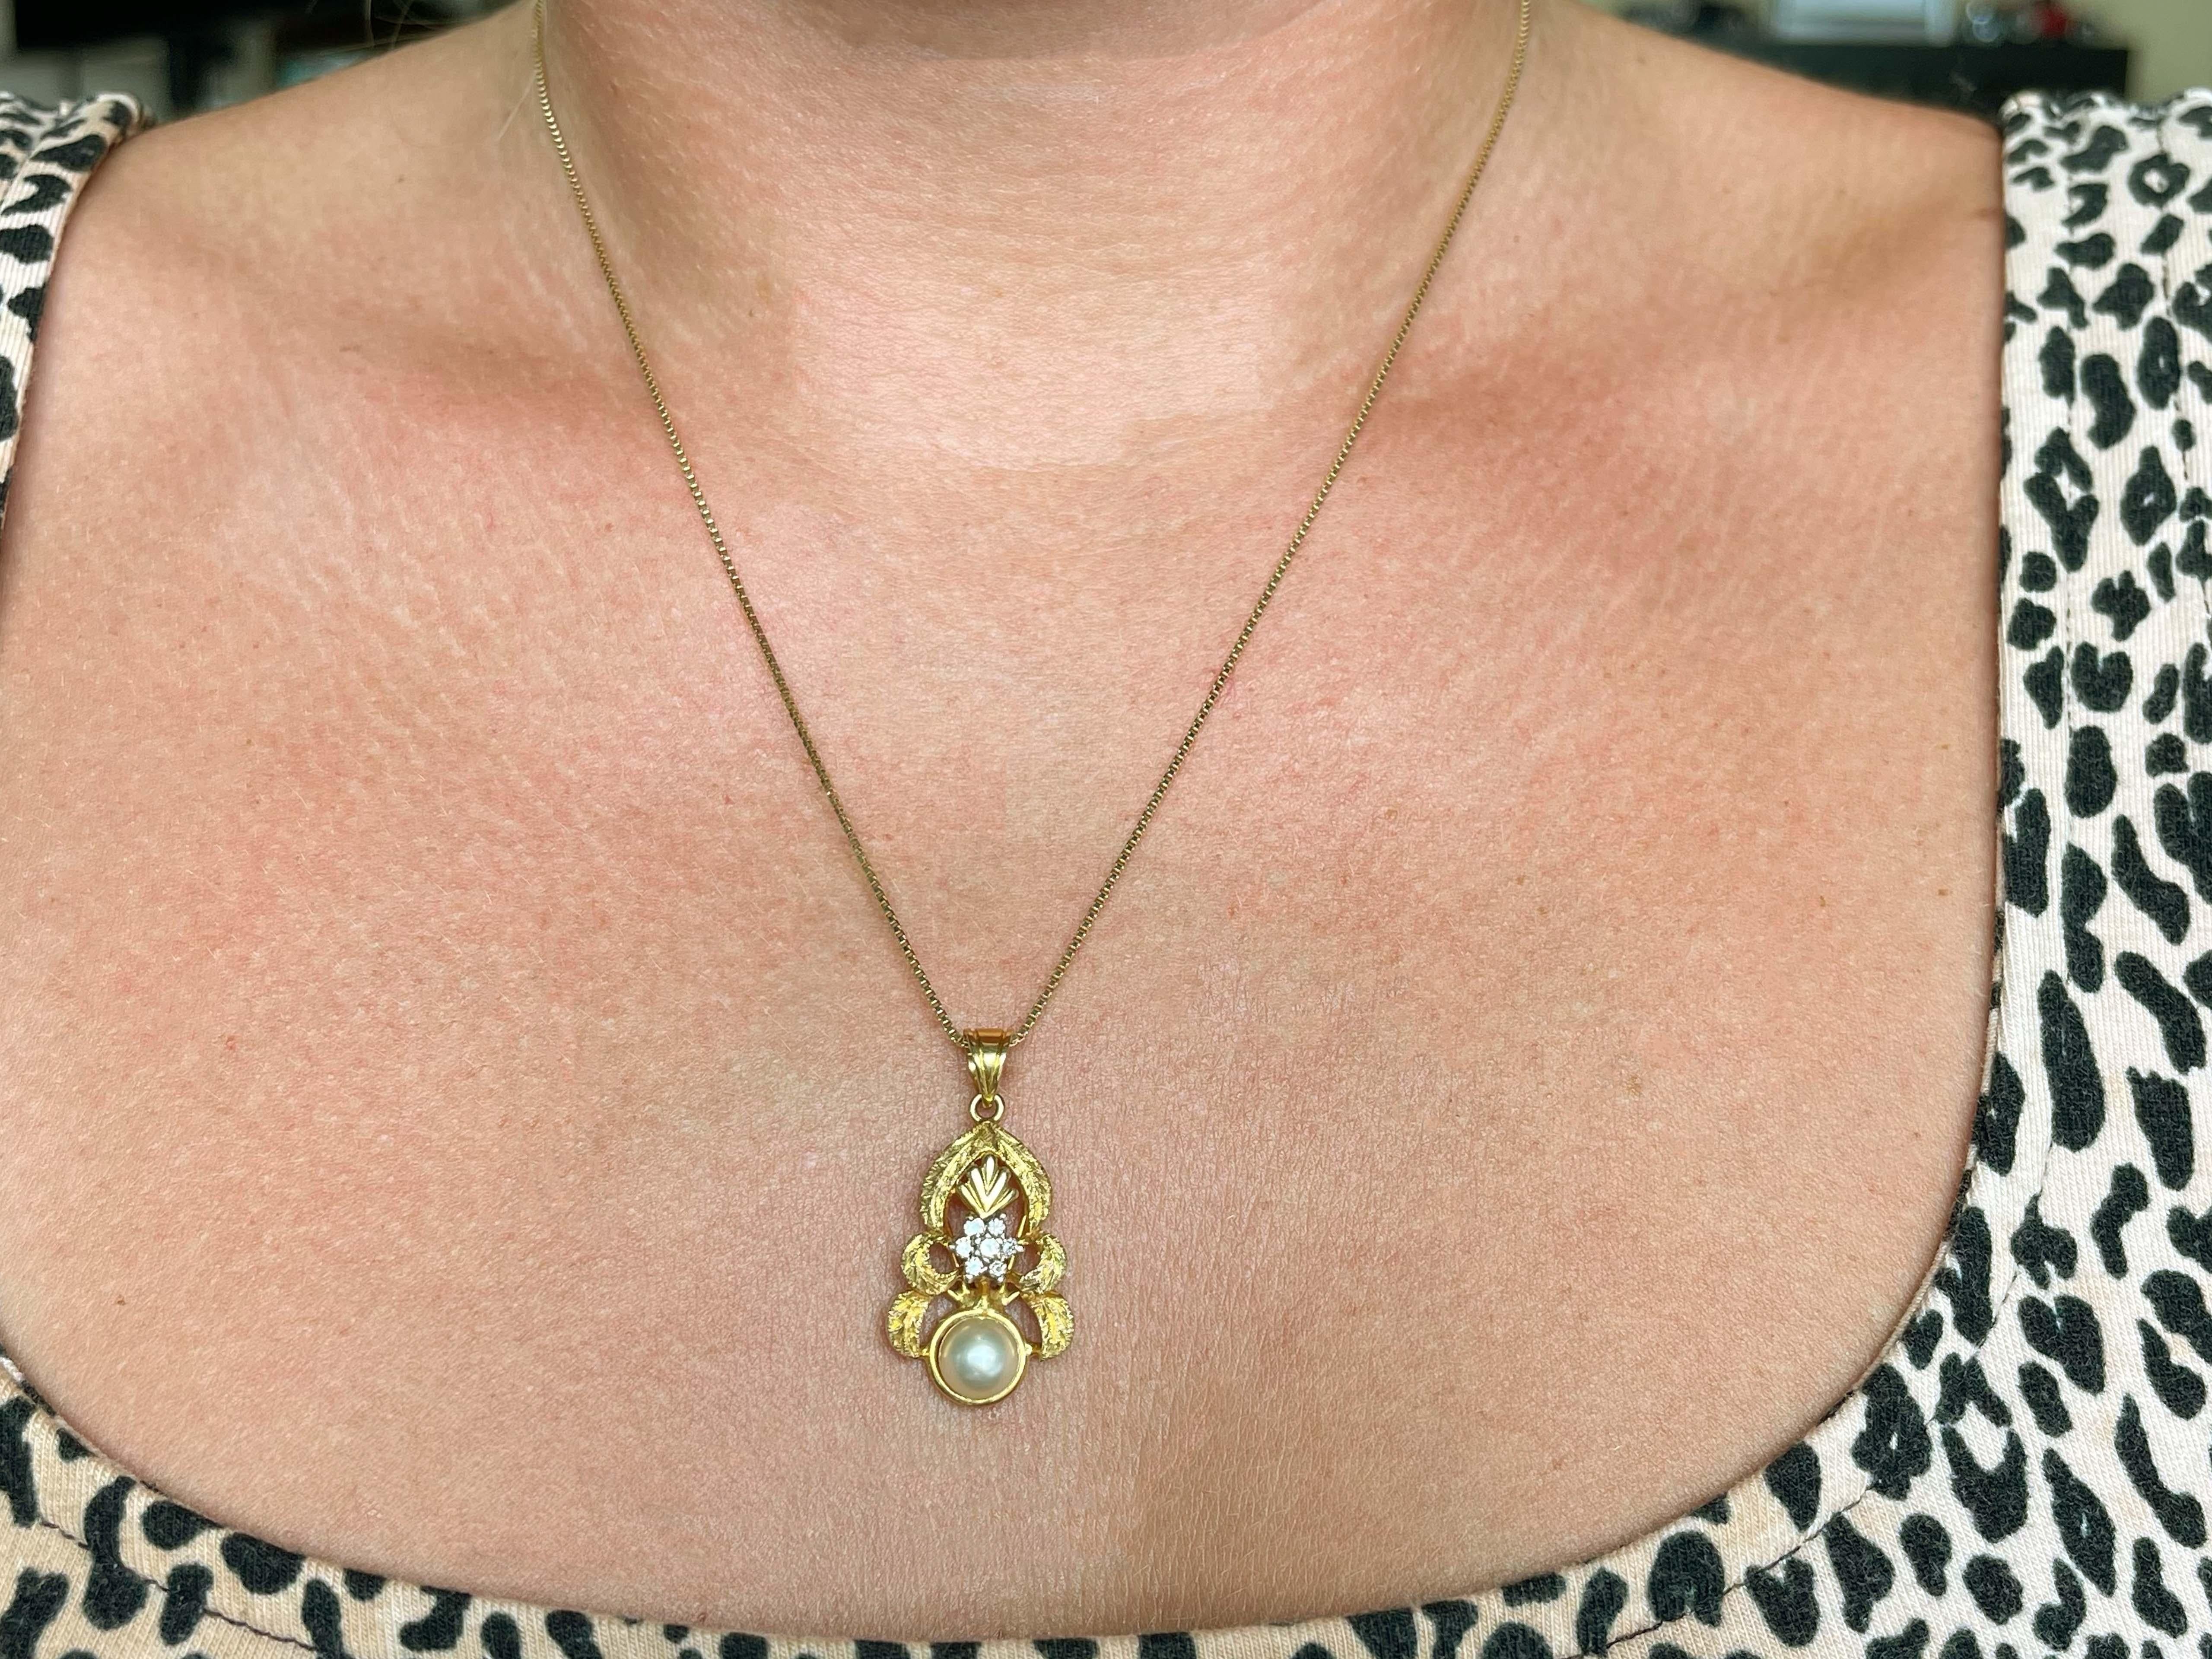 Item Specifications:

Necklace Metal: 14k Yellow Gold

Total Weight: 9.2 Grams

Chain Length: 18